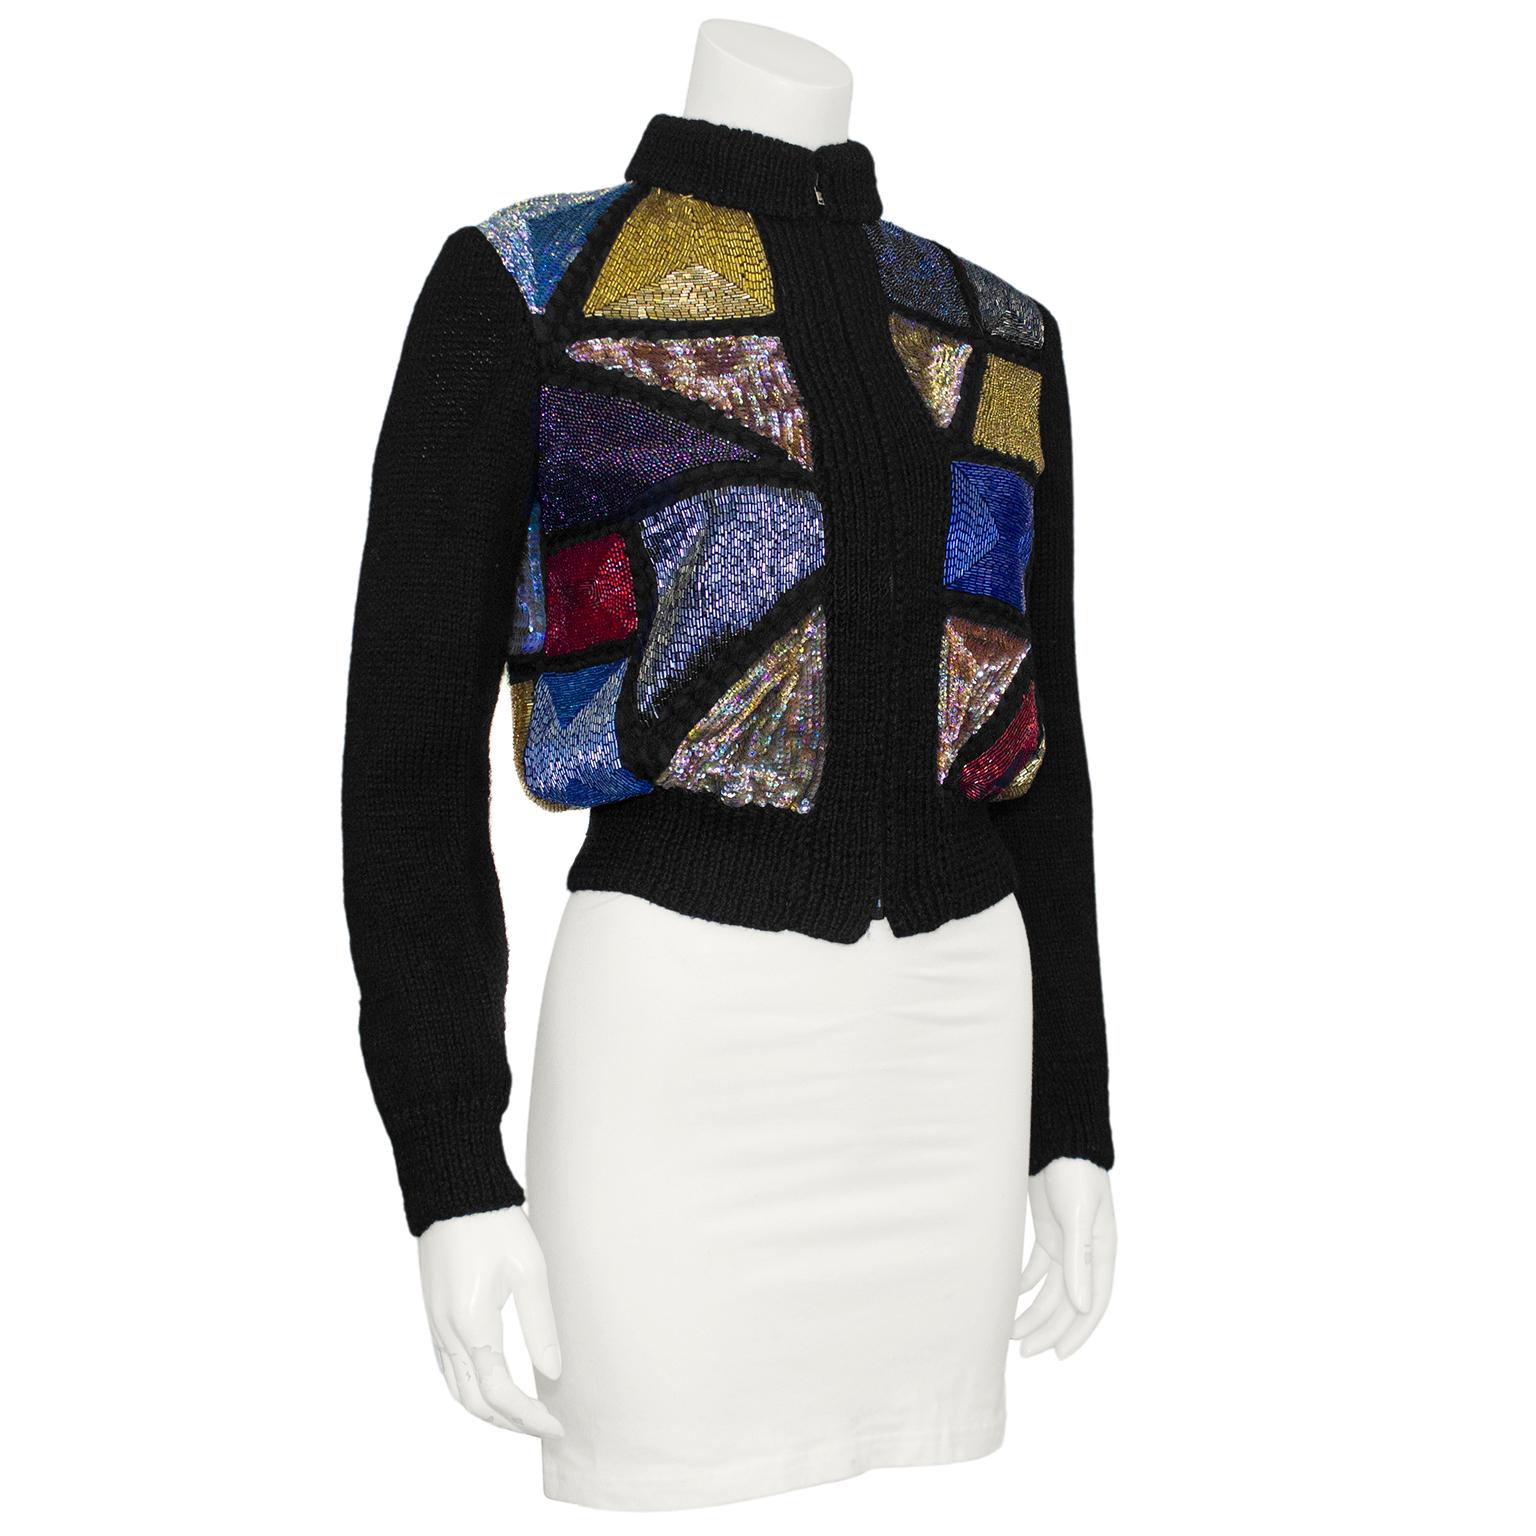 Amazing sequin stained glass window patchwork pattern sweater from the 1980s. The beaded patchwork features sequins, seed beads and bugle beads in gold, blue, purple, red, gunmetal and iridescent.  The interior of the body is lined in black rayon.